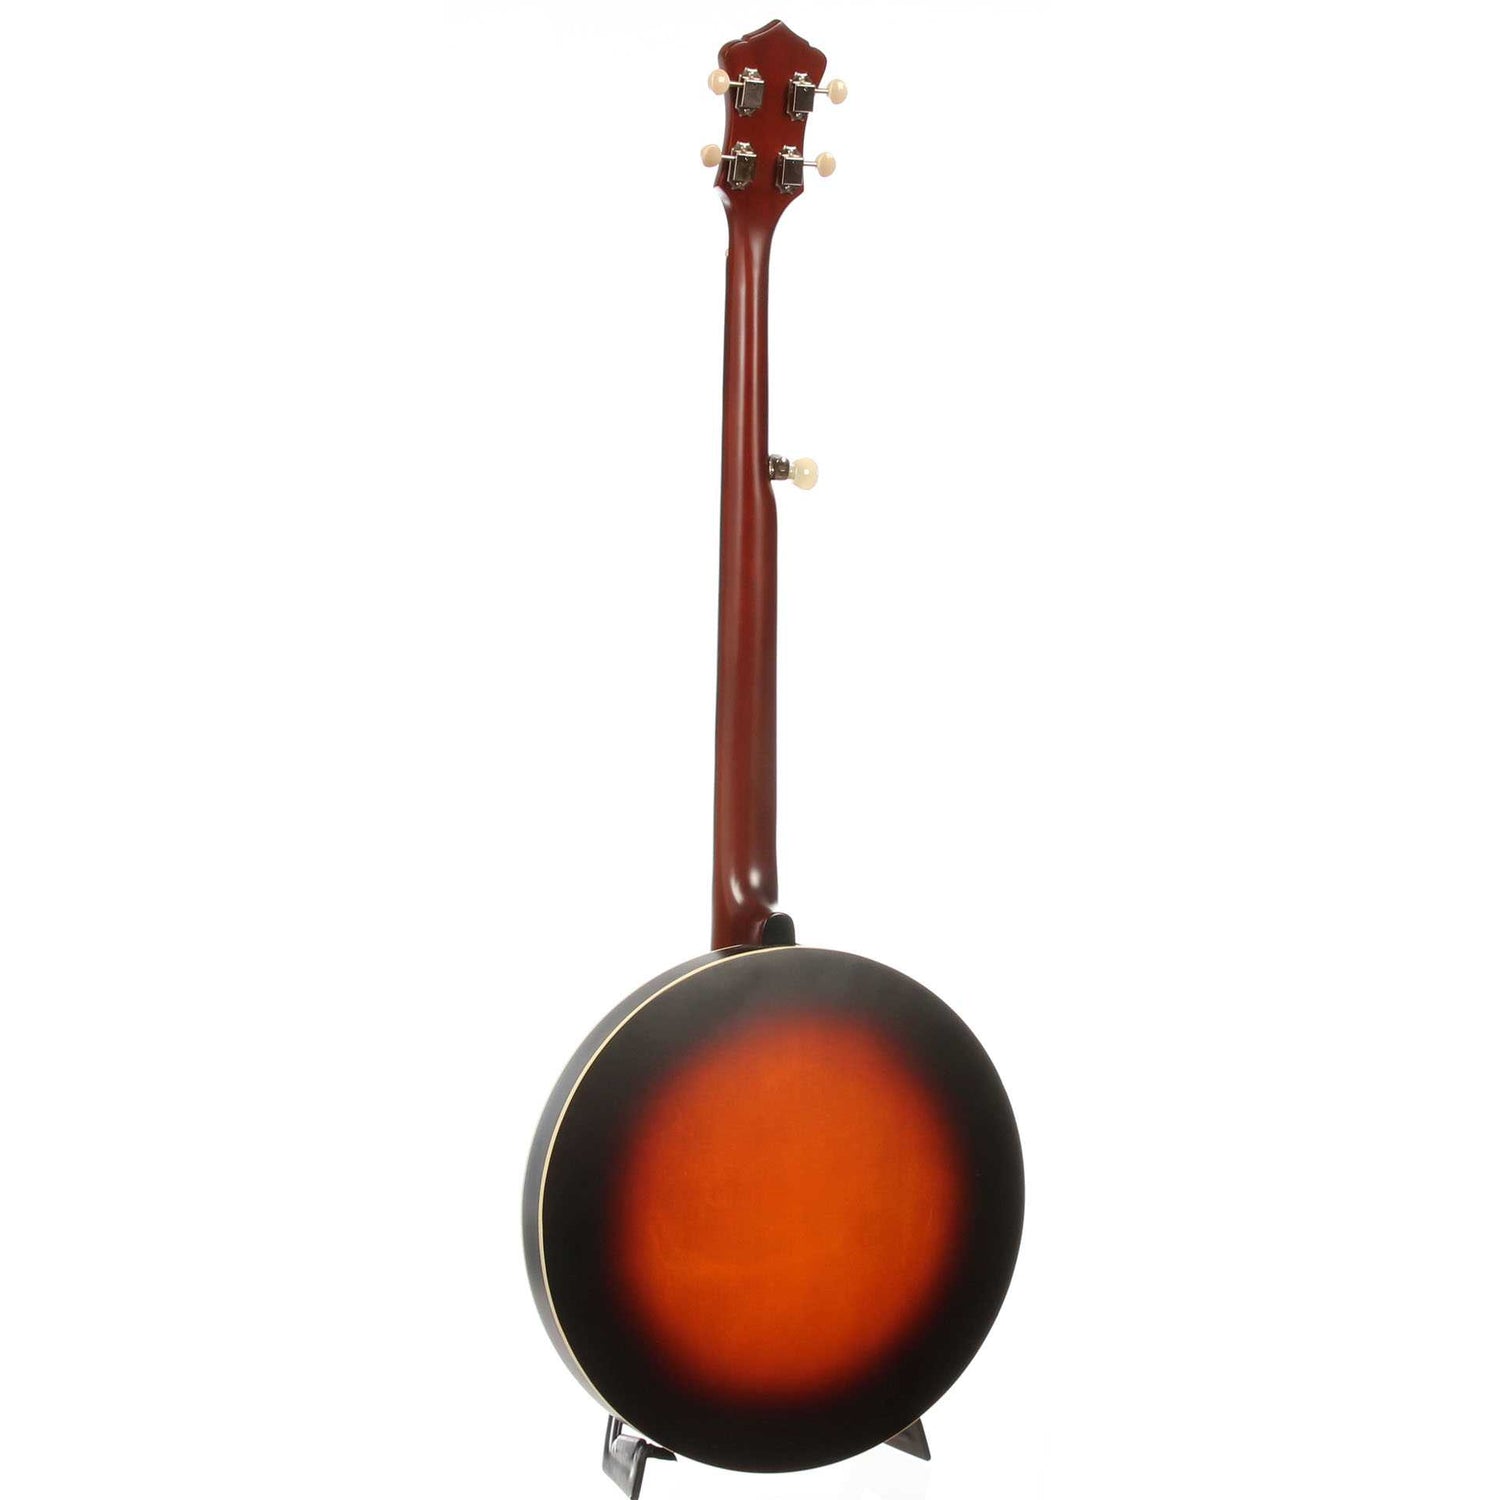 Image 11 of * Elderly Instruments Bluegrass Banjo Outfit - SKU# DEAL5A : Product Type Resonator Back Banjos : Elderly Instruments